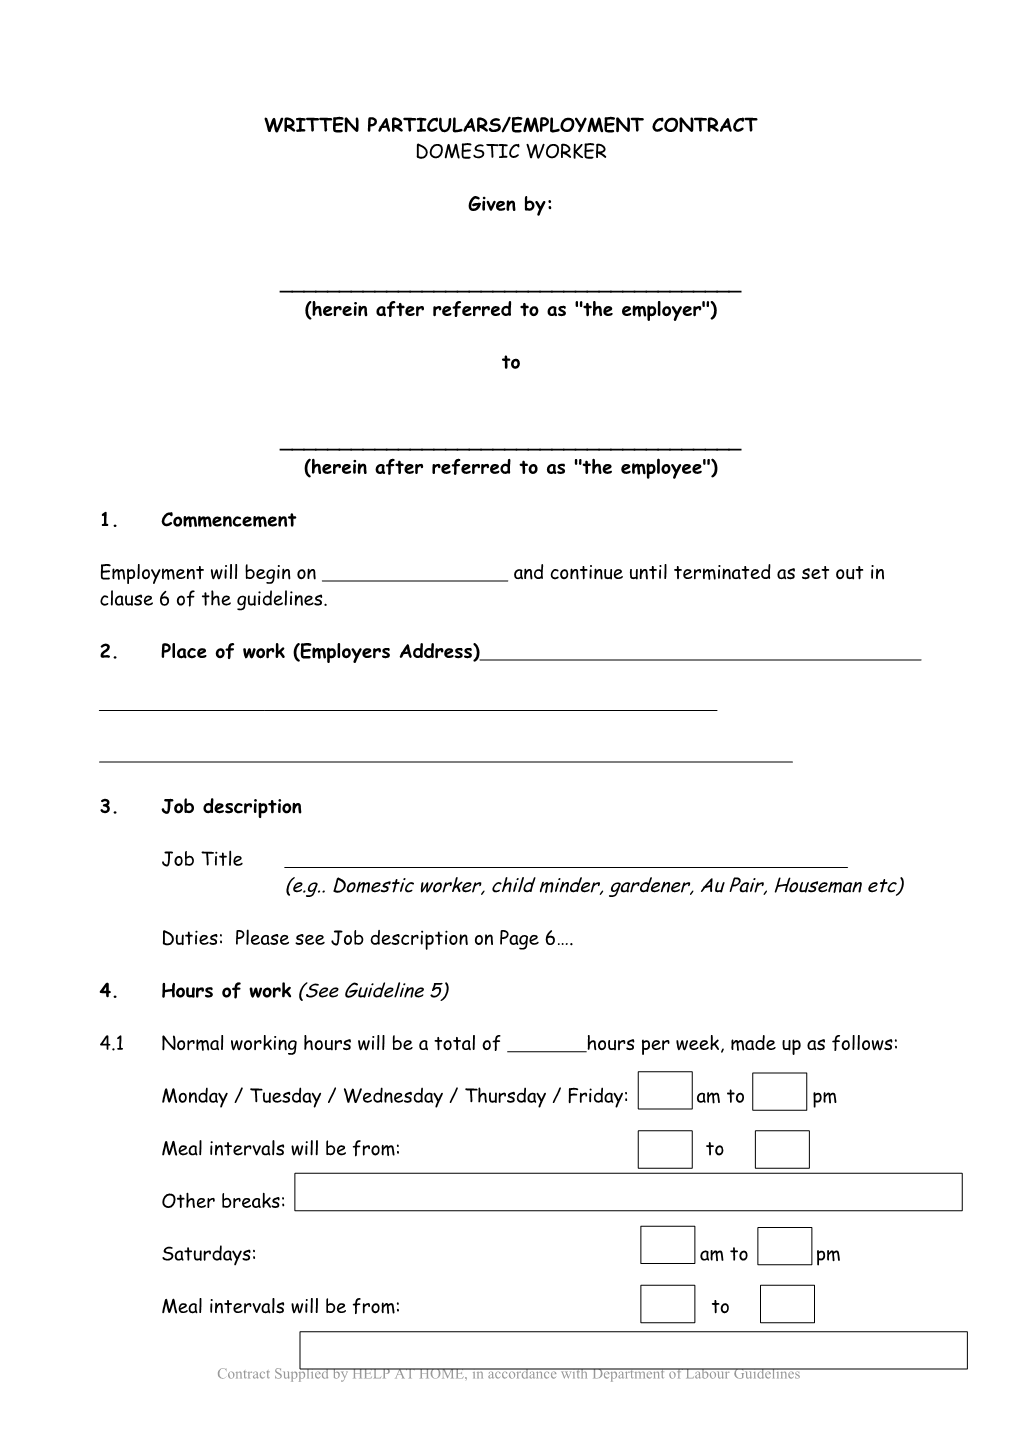 Contract of Employment s1